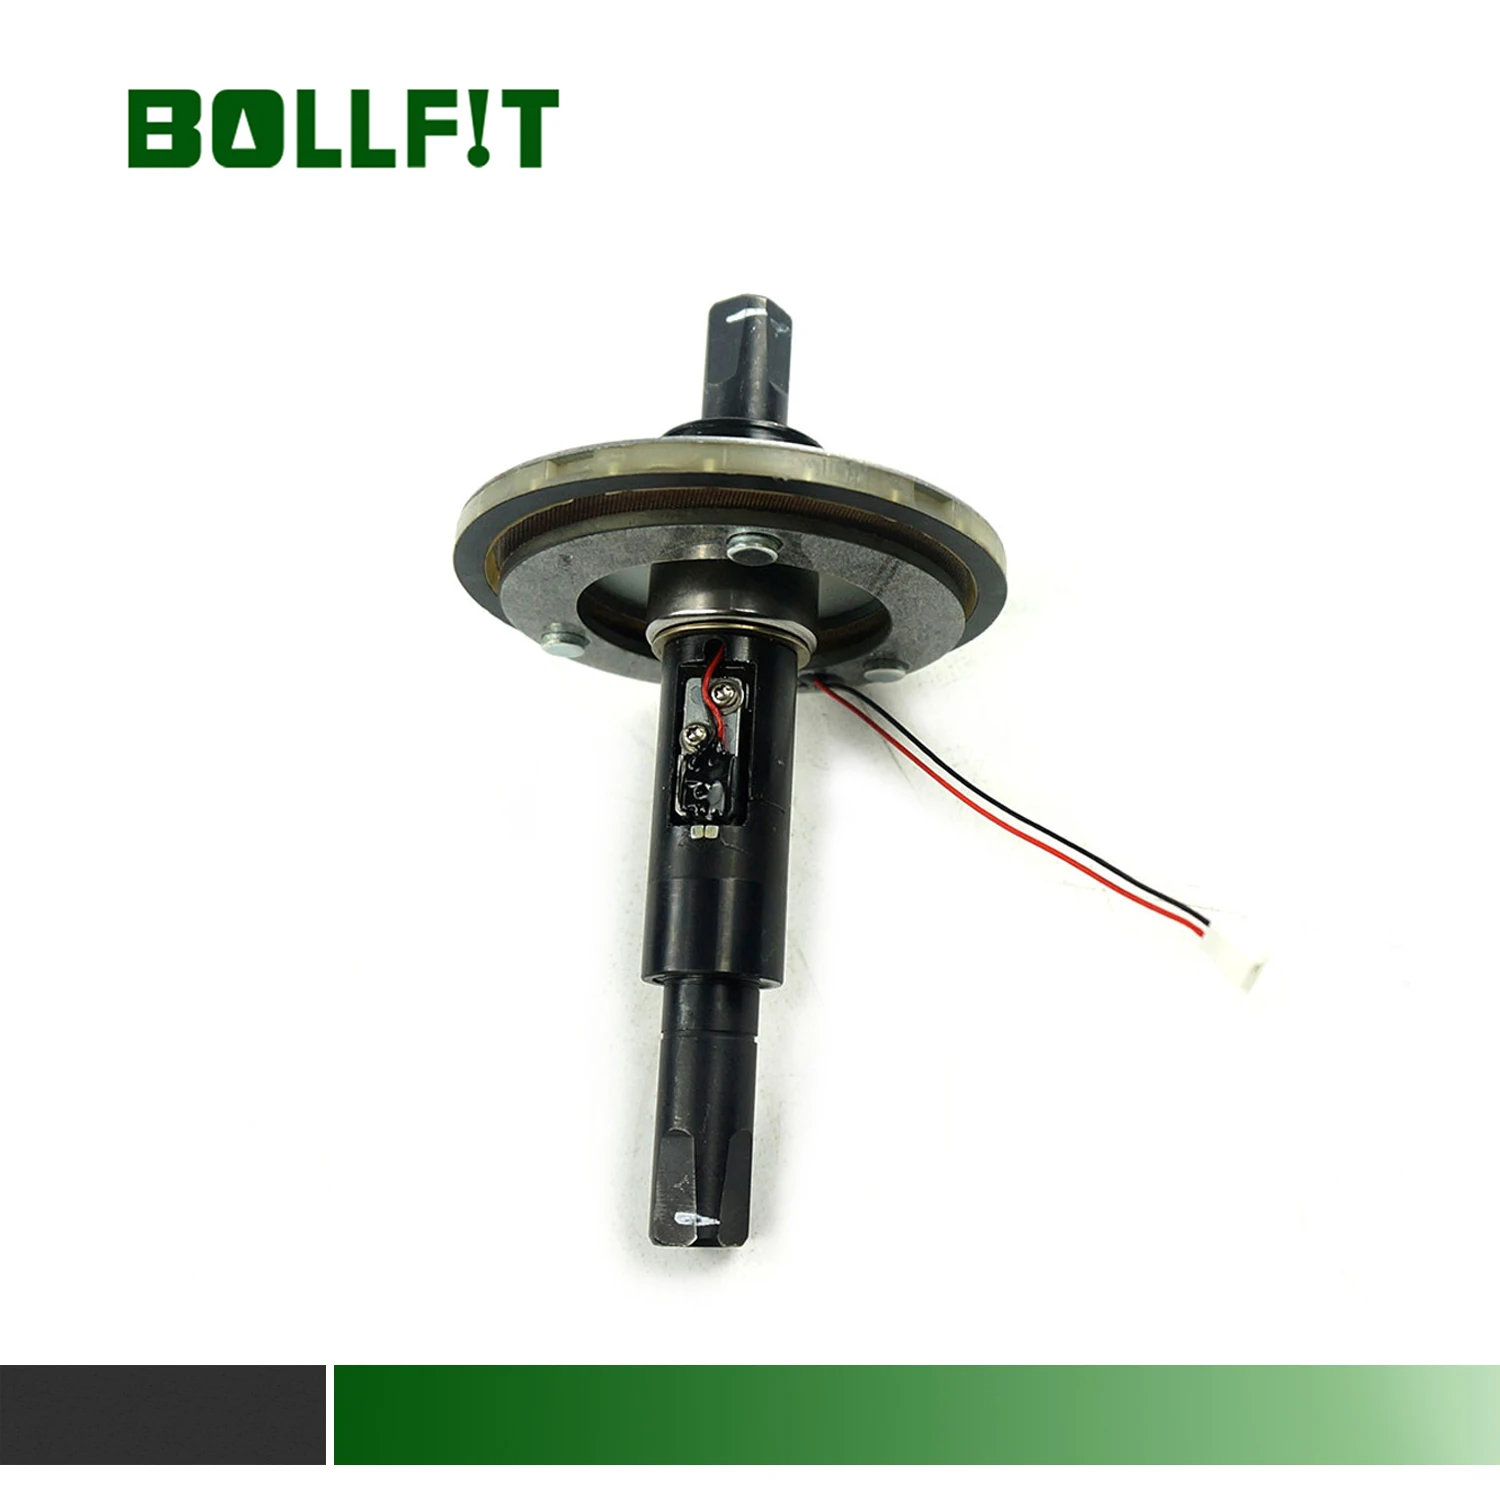 

Bollfit TSDZ 2 New Old Torque Sensor Electric Bicycle Parts Replacement for 36V48V Mid Drive Ebike Tongsheng